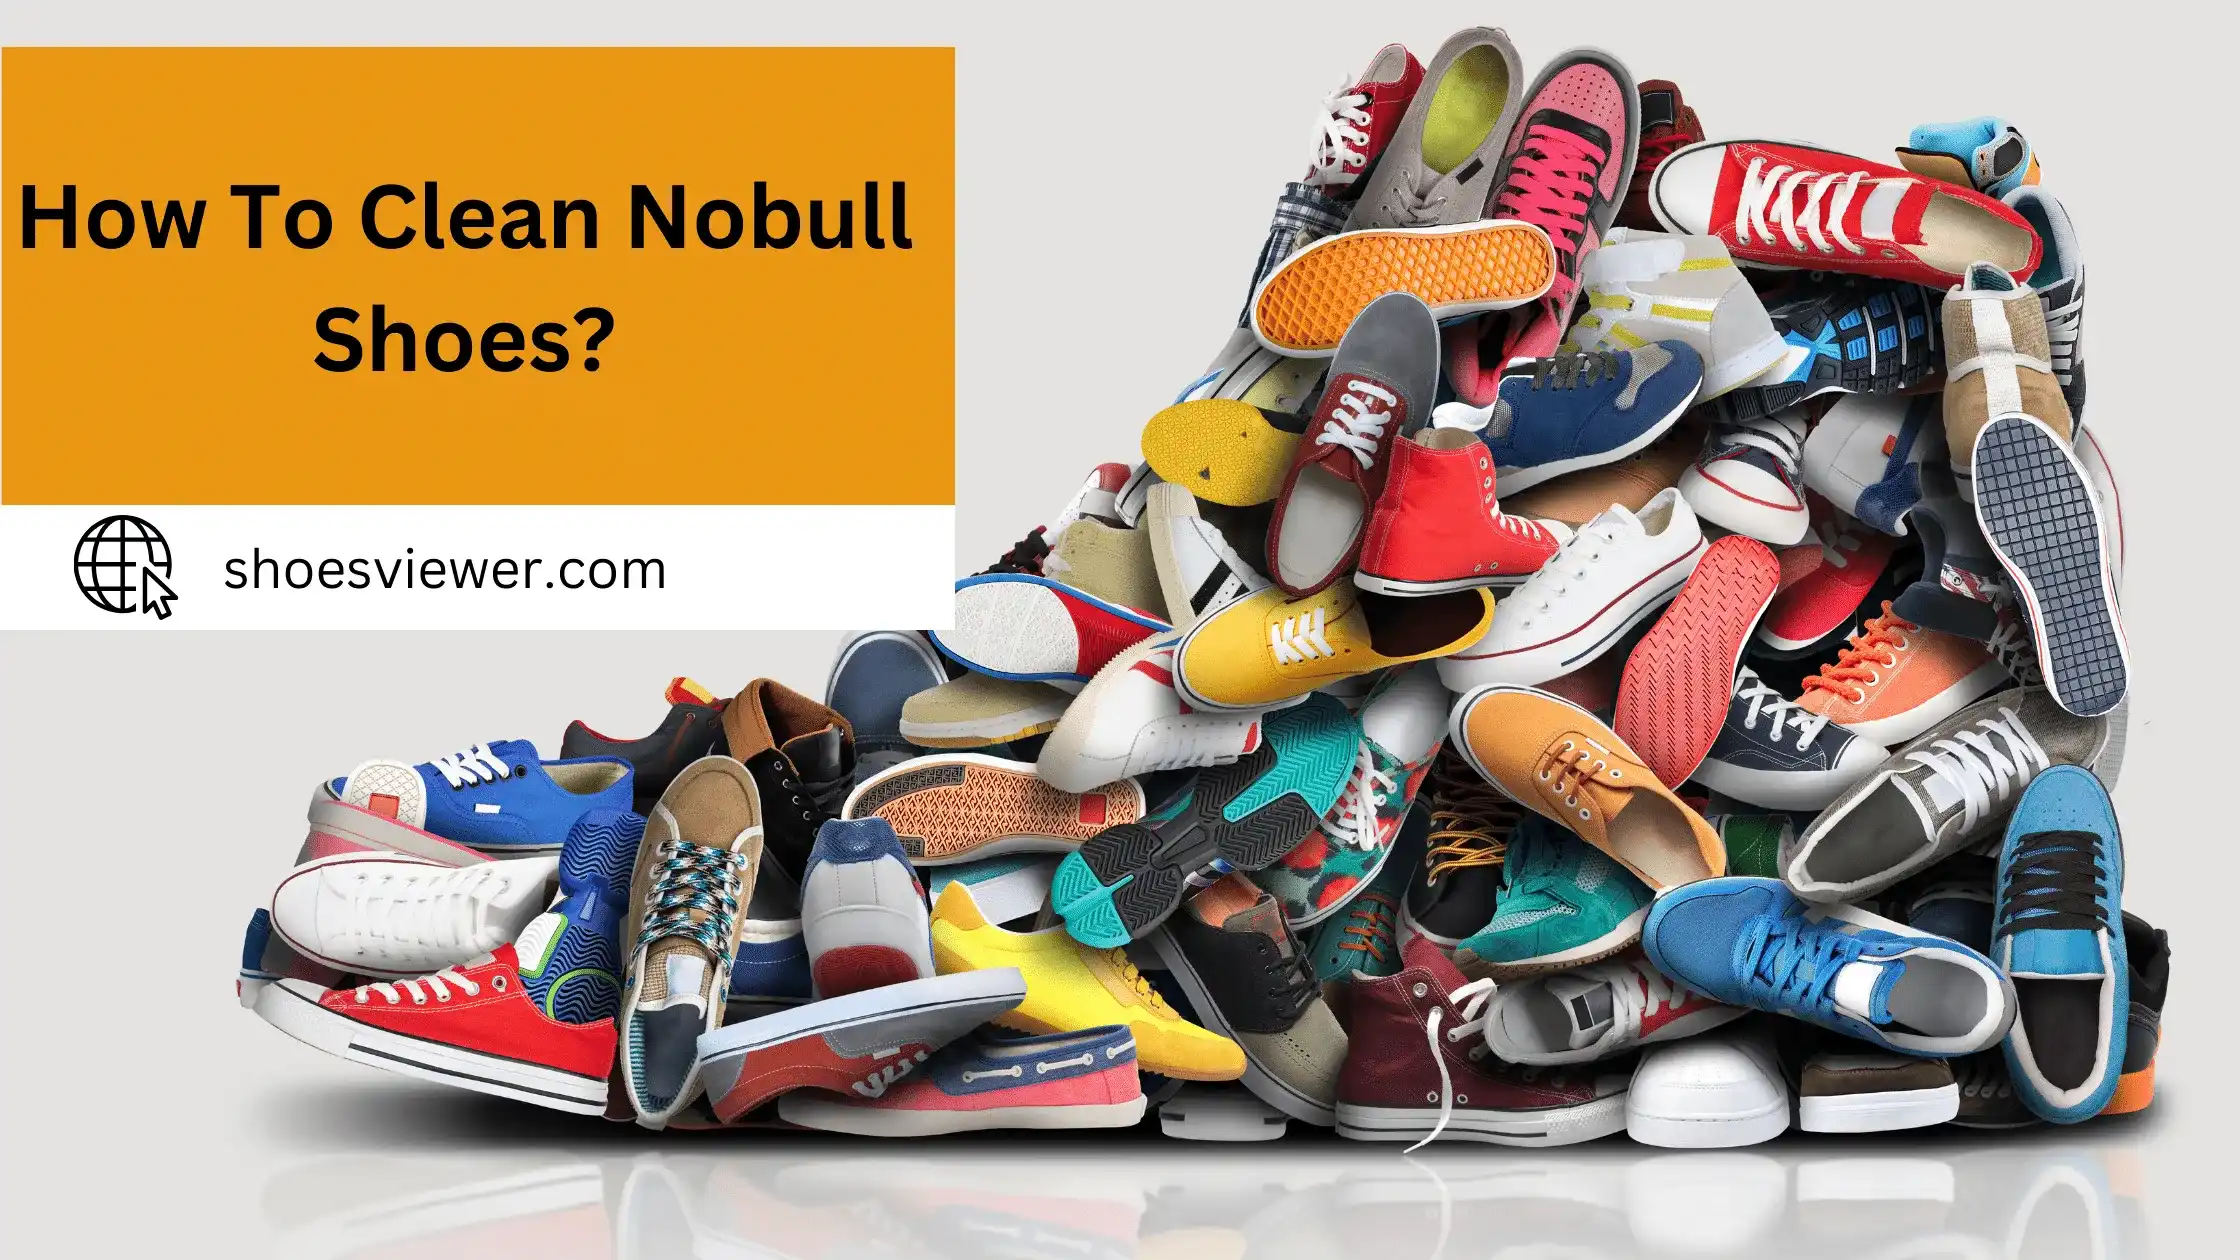 How To Clean Nobull Shoes? Cleaning Instructions